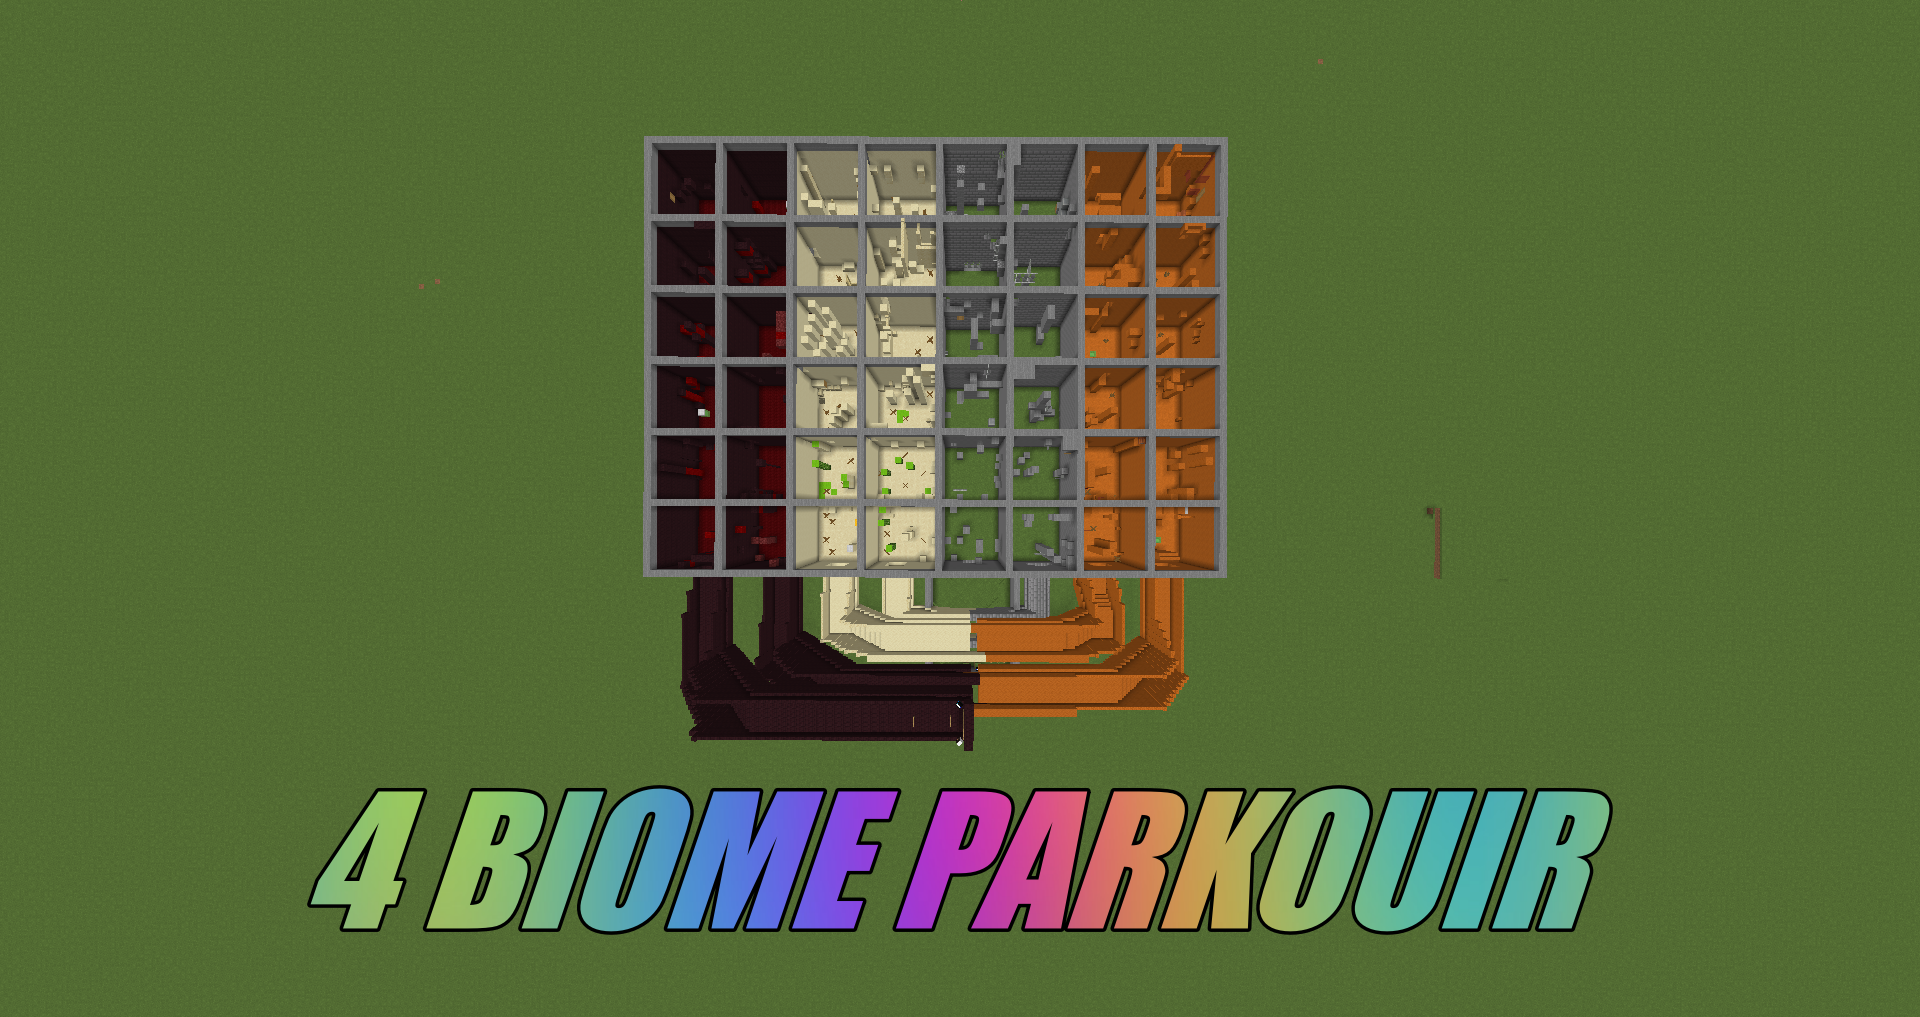 Download 4 Biome Parkour for Minecraft 1.16.5